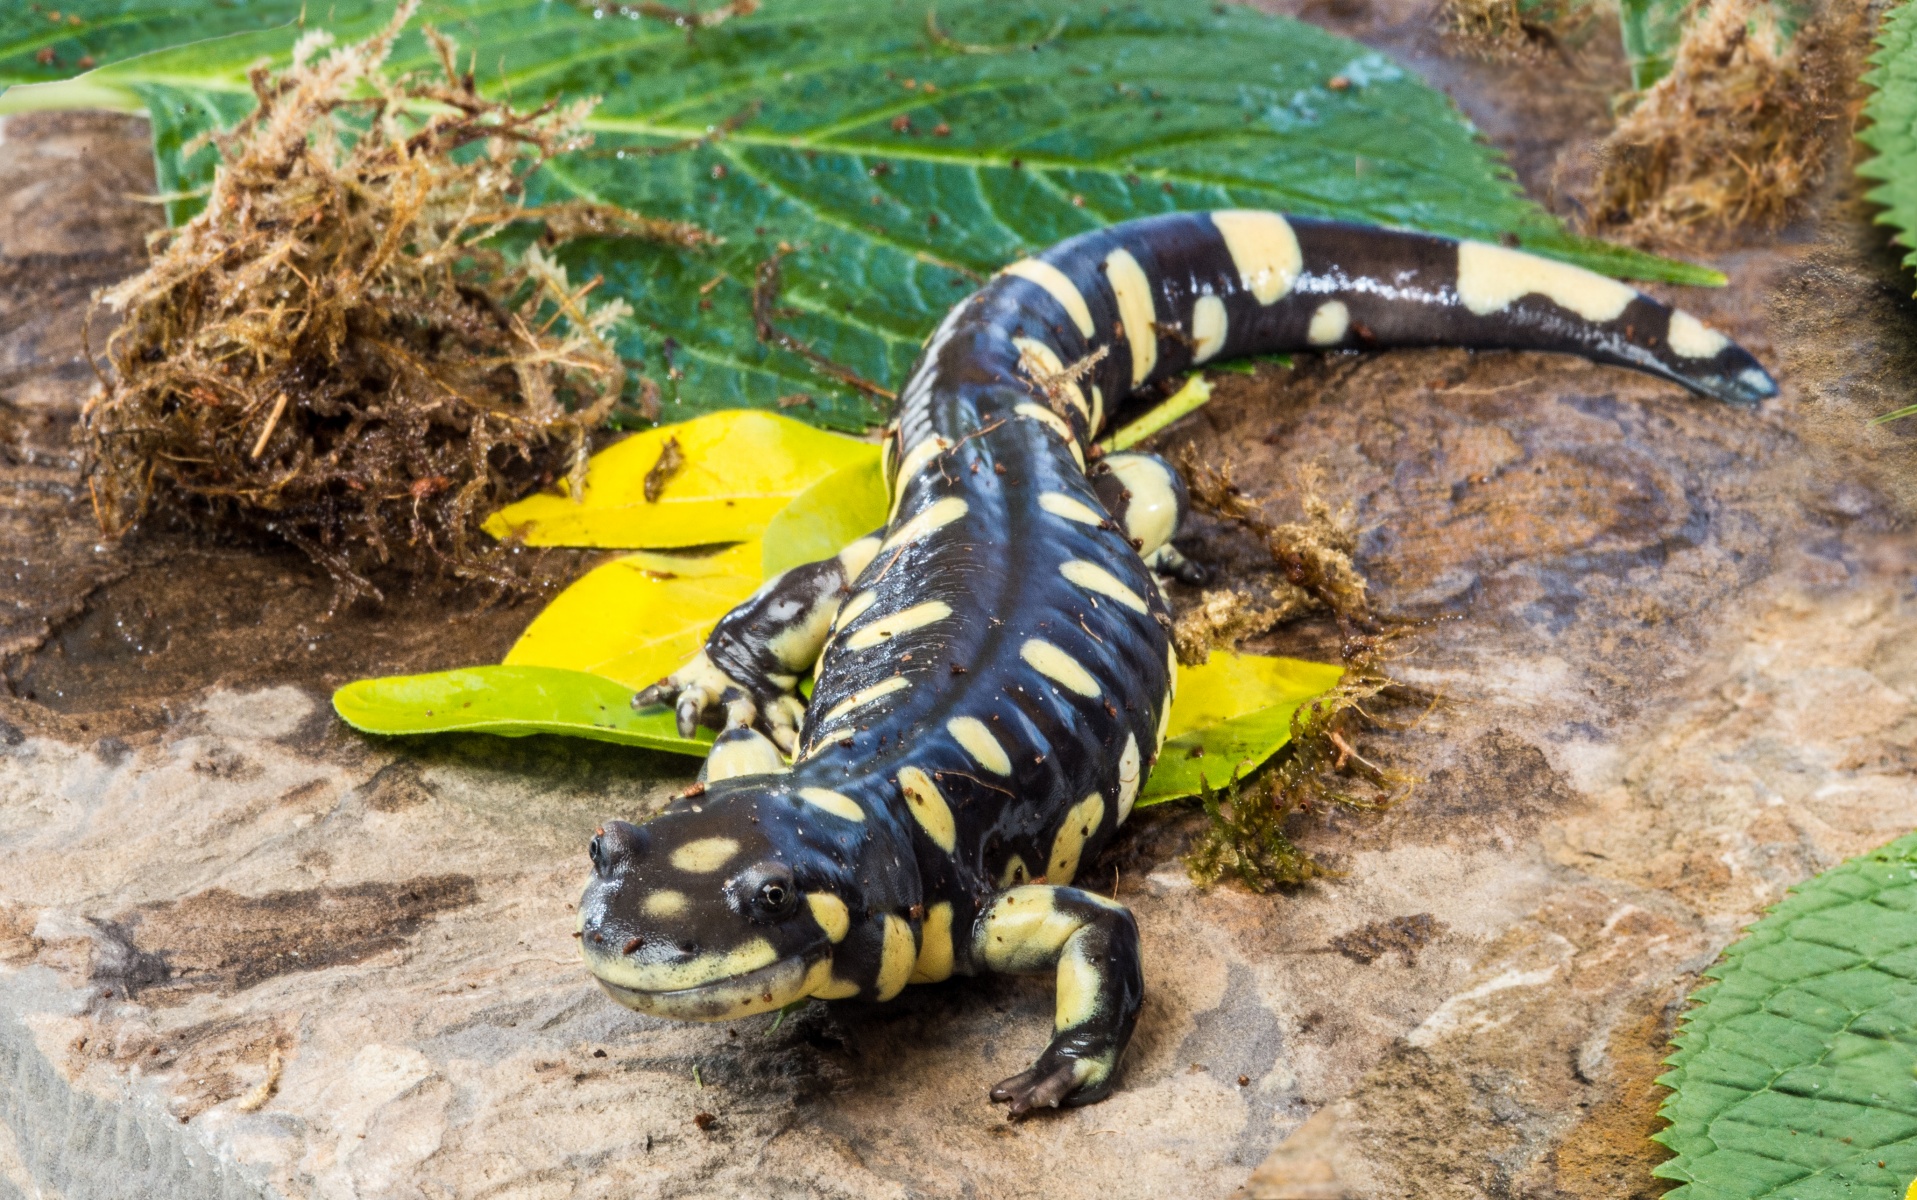 Bay Area Reptiles and Amphibians Workshop - Lindsay Wildlife Experience